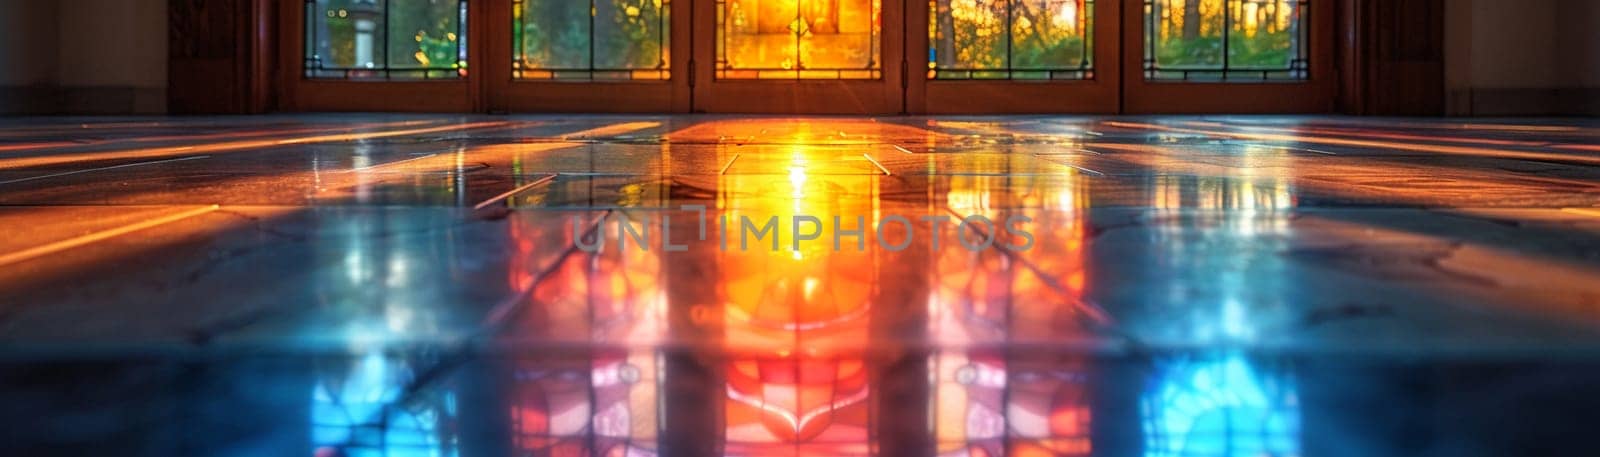 Stained Glass Window Casting Colored Light on a Church Floor, The vibrant hues blend and blur, telling biblical stories in light.